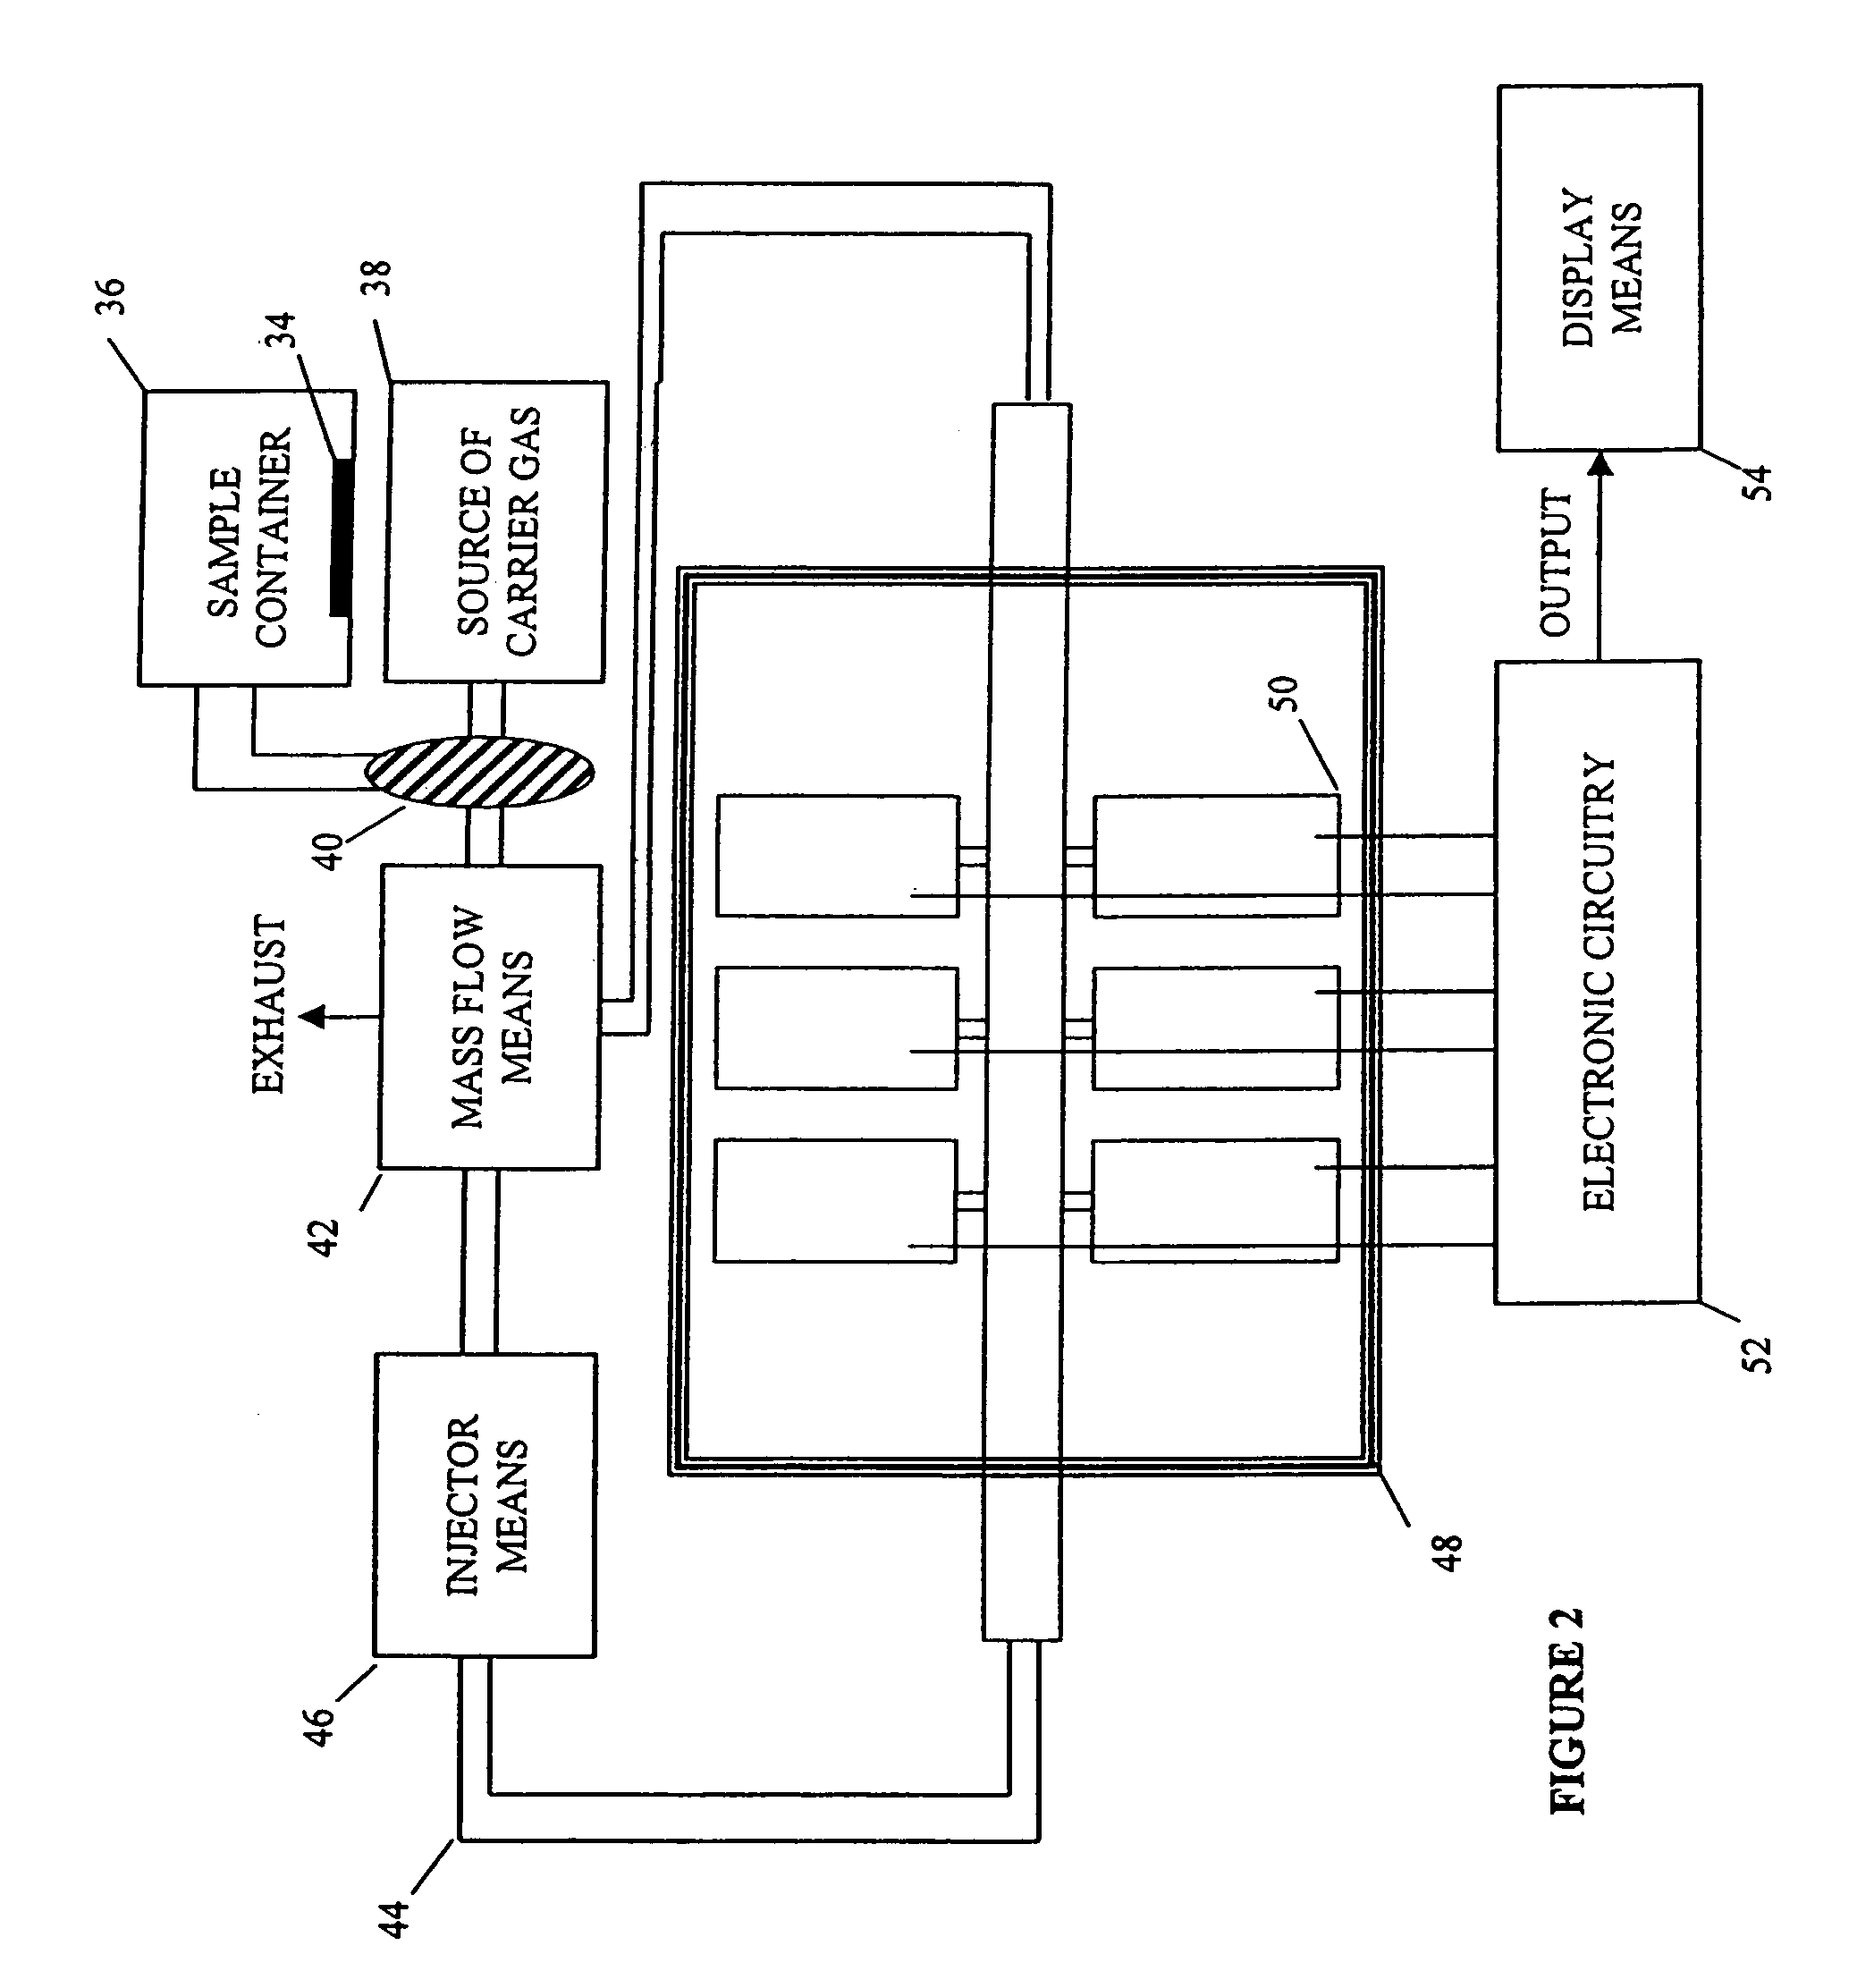 Method and apparatus for monitoring materials used in electronics